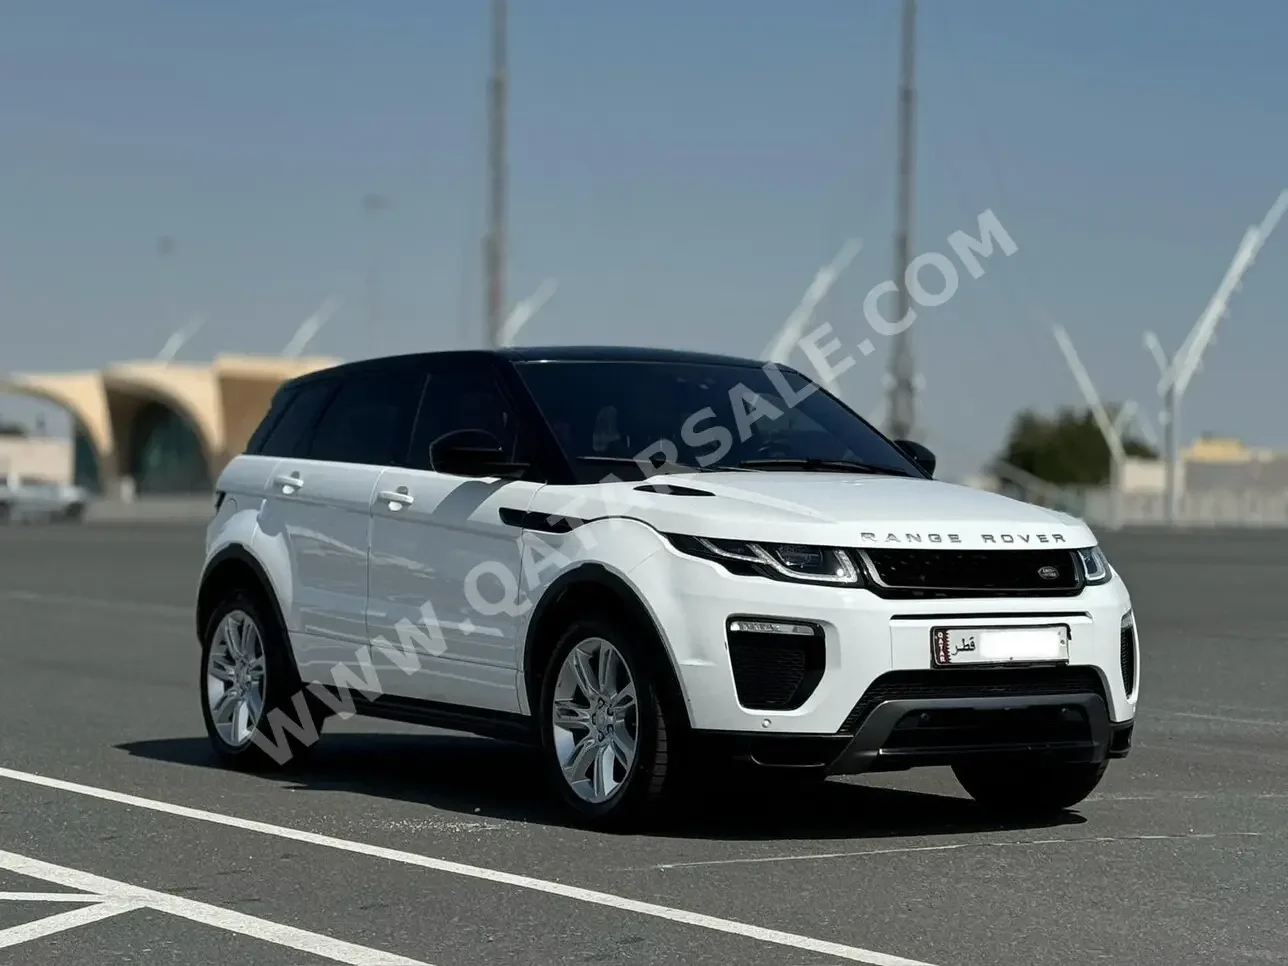 Land Rover  Evoque  Dynamic  2017  Automatic  150,000 Km  4 Cylinder  Four Wheel Drive (4WD)  SUV  White